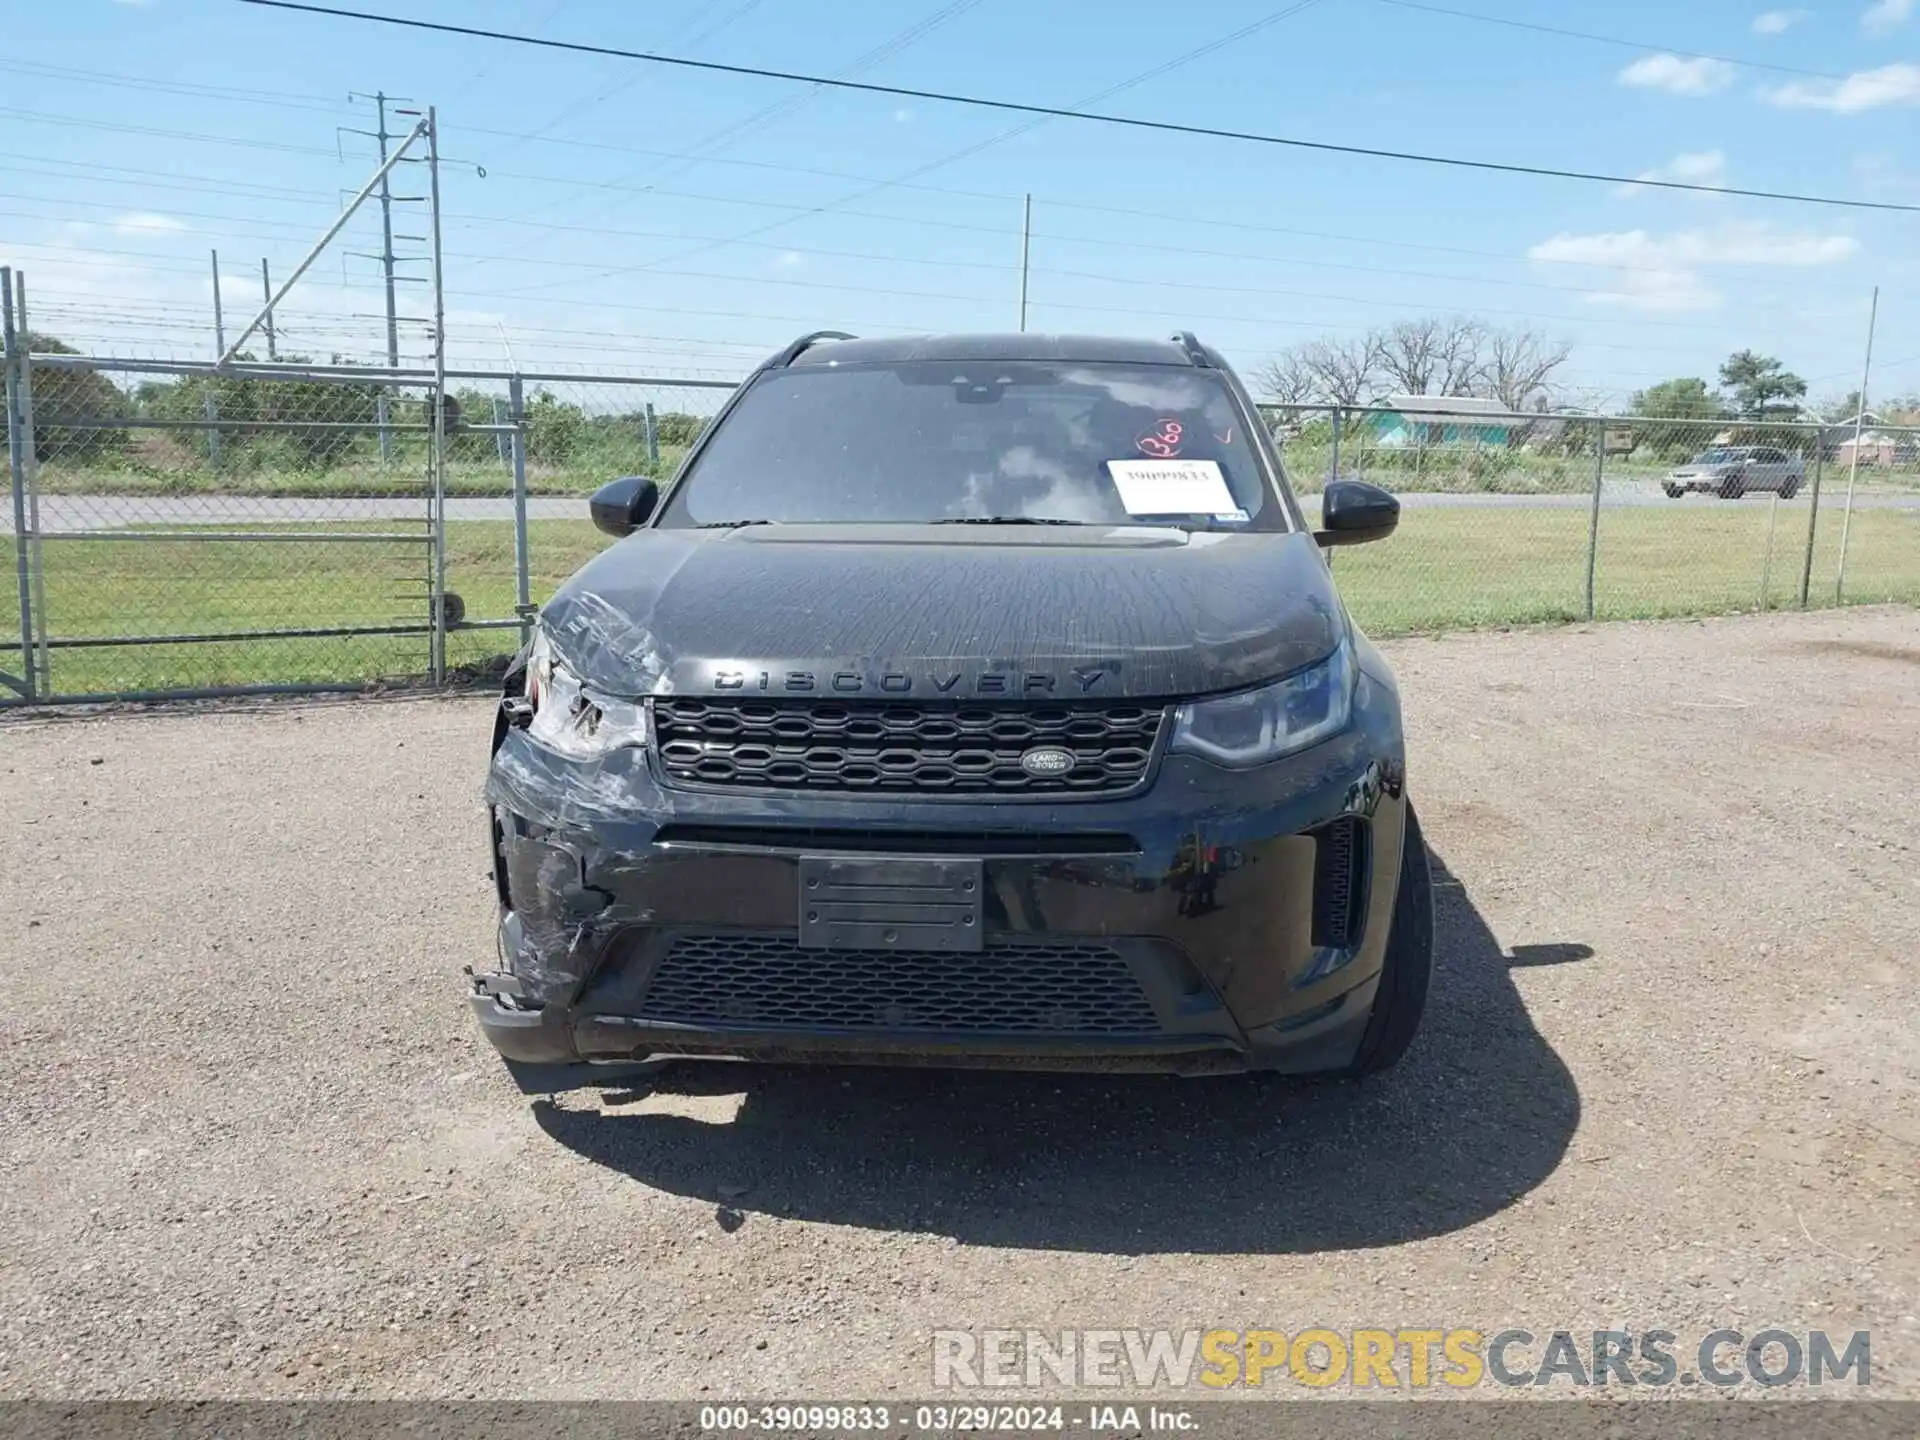 12 Photograph of a damaged car SALCP2FX7LH851493 LAND ROVER DISCOVERY SPORT 2020